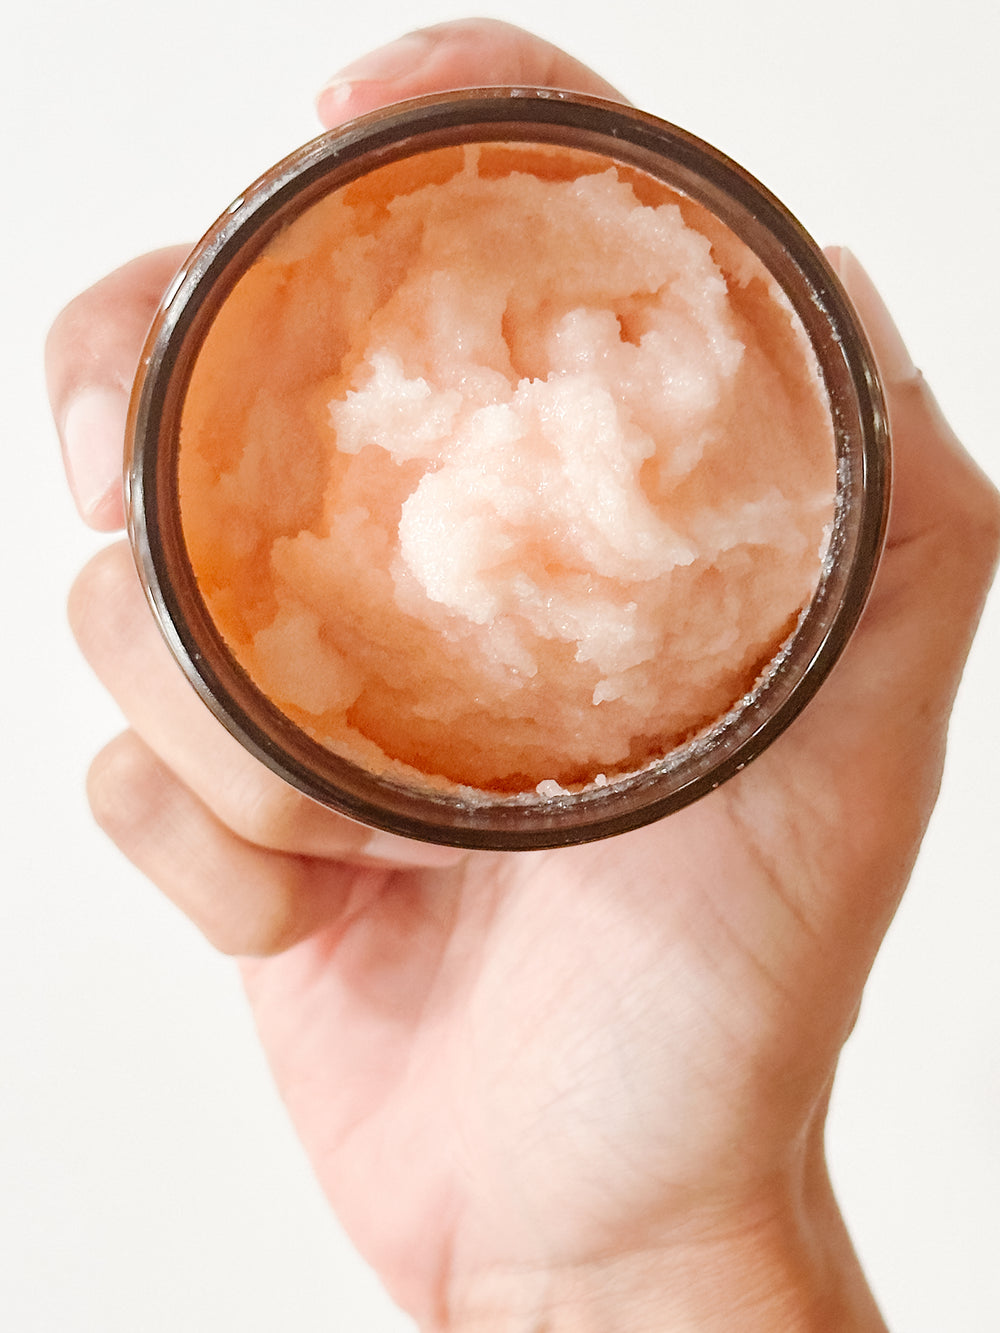 What are emulsified body scrubs? How do they differ from others?